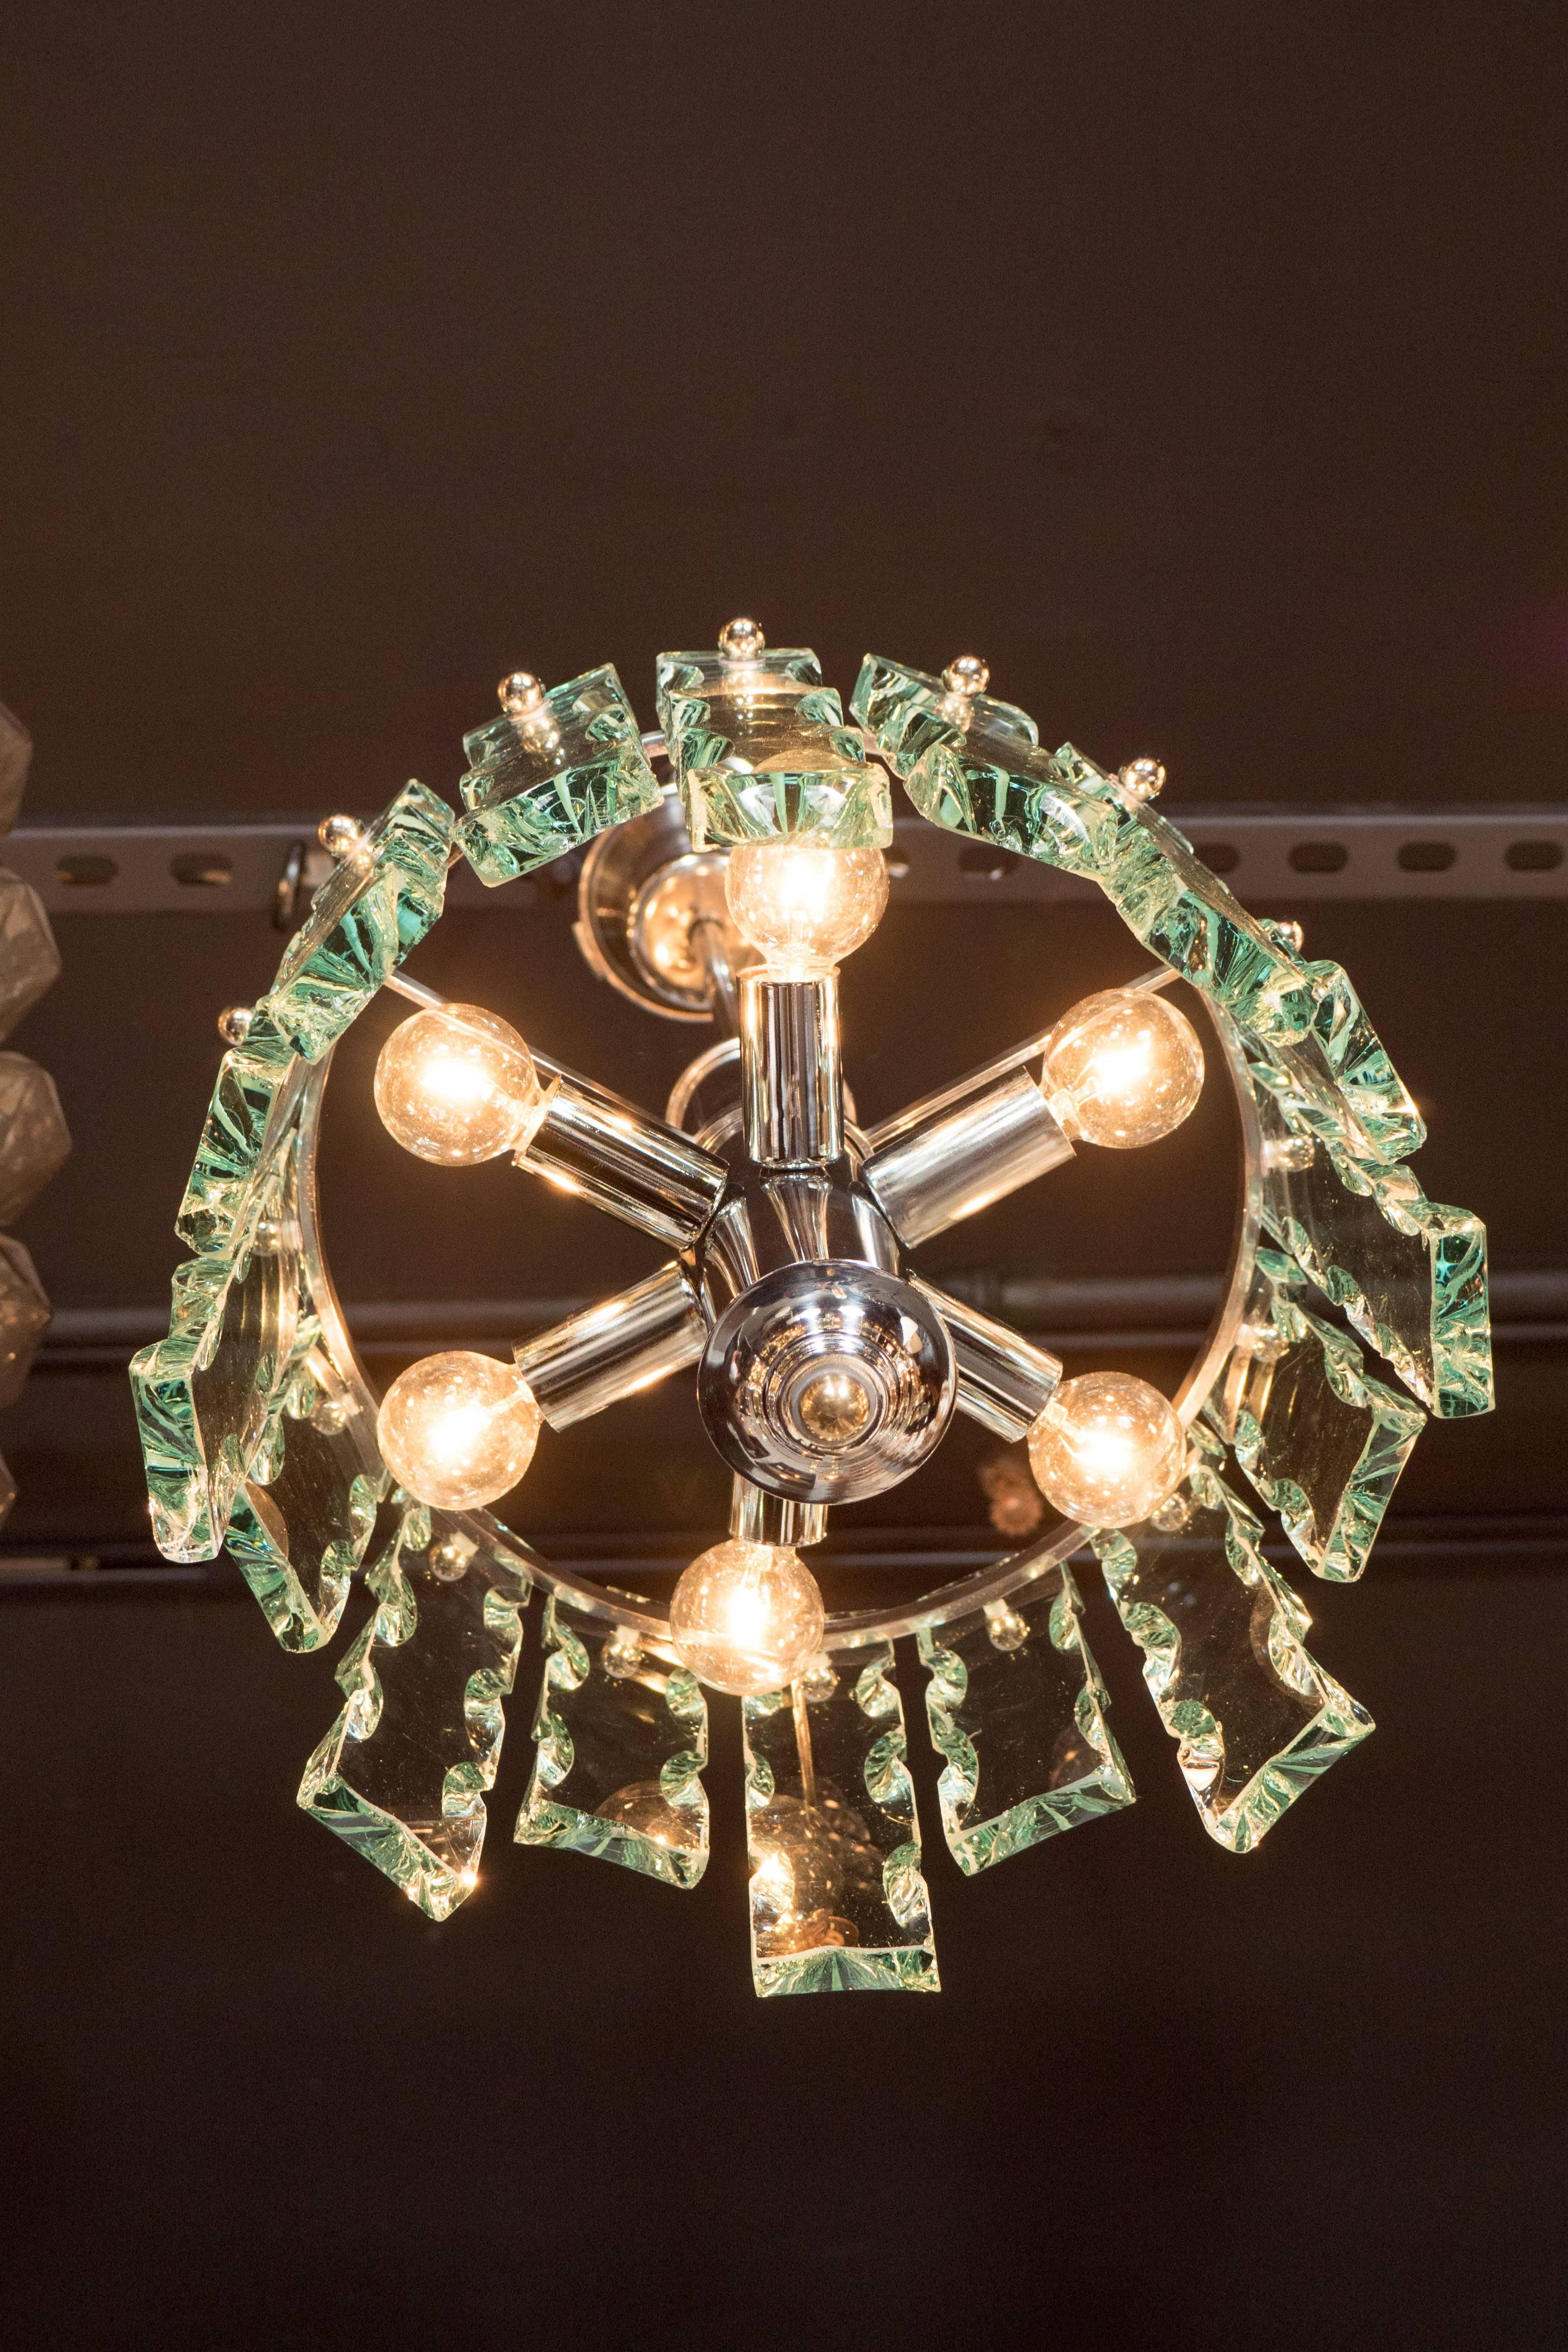 A Mid-Century Modernist chiseled glass chandelier in the style of Fontana Arte. Hand-cut, hand-chipped glass segments are suspended by polished chrome ball fittings in a staggered manner around a polished chrome frame. Light is emitted from six